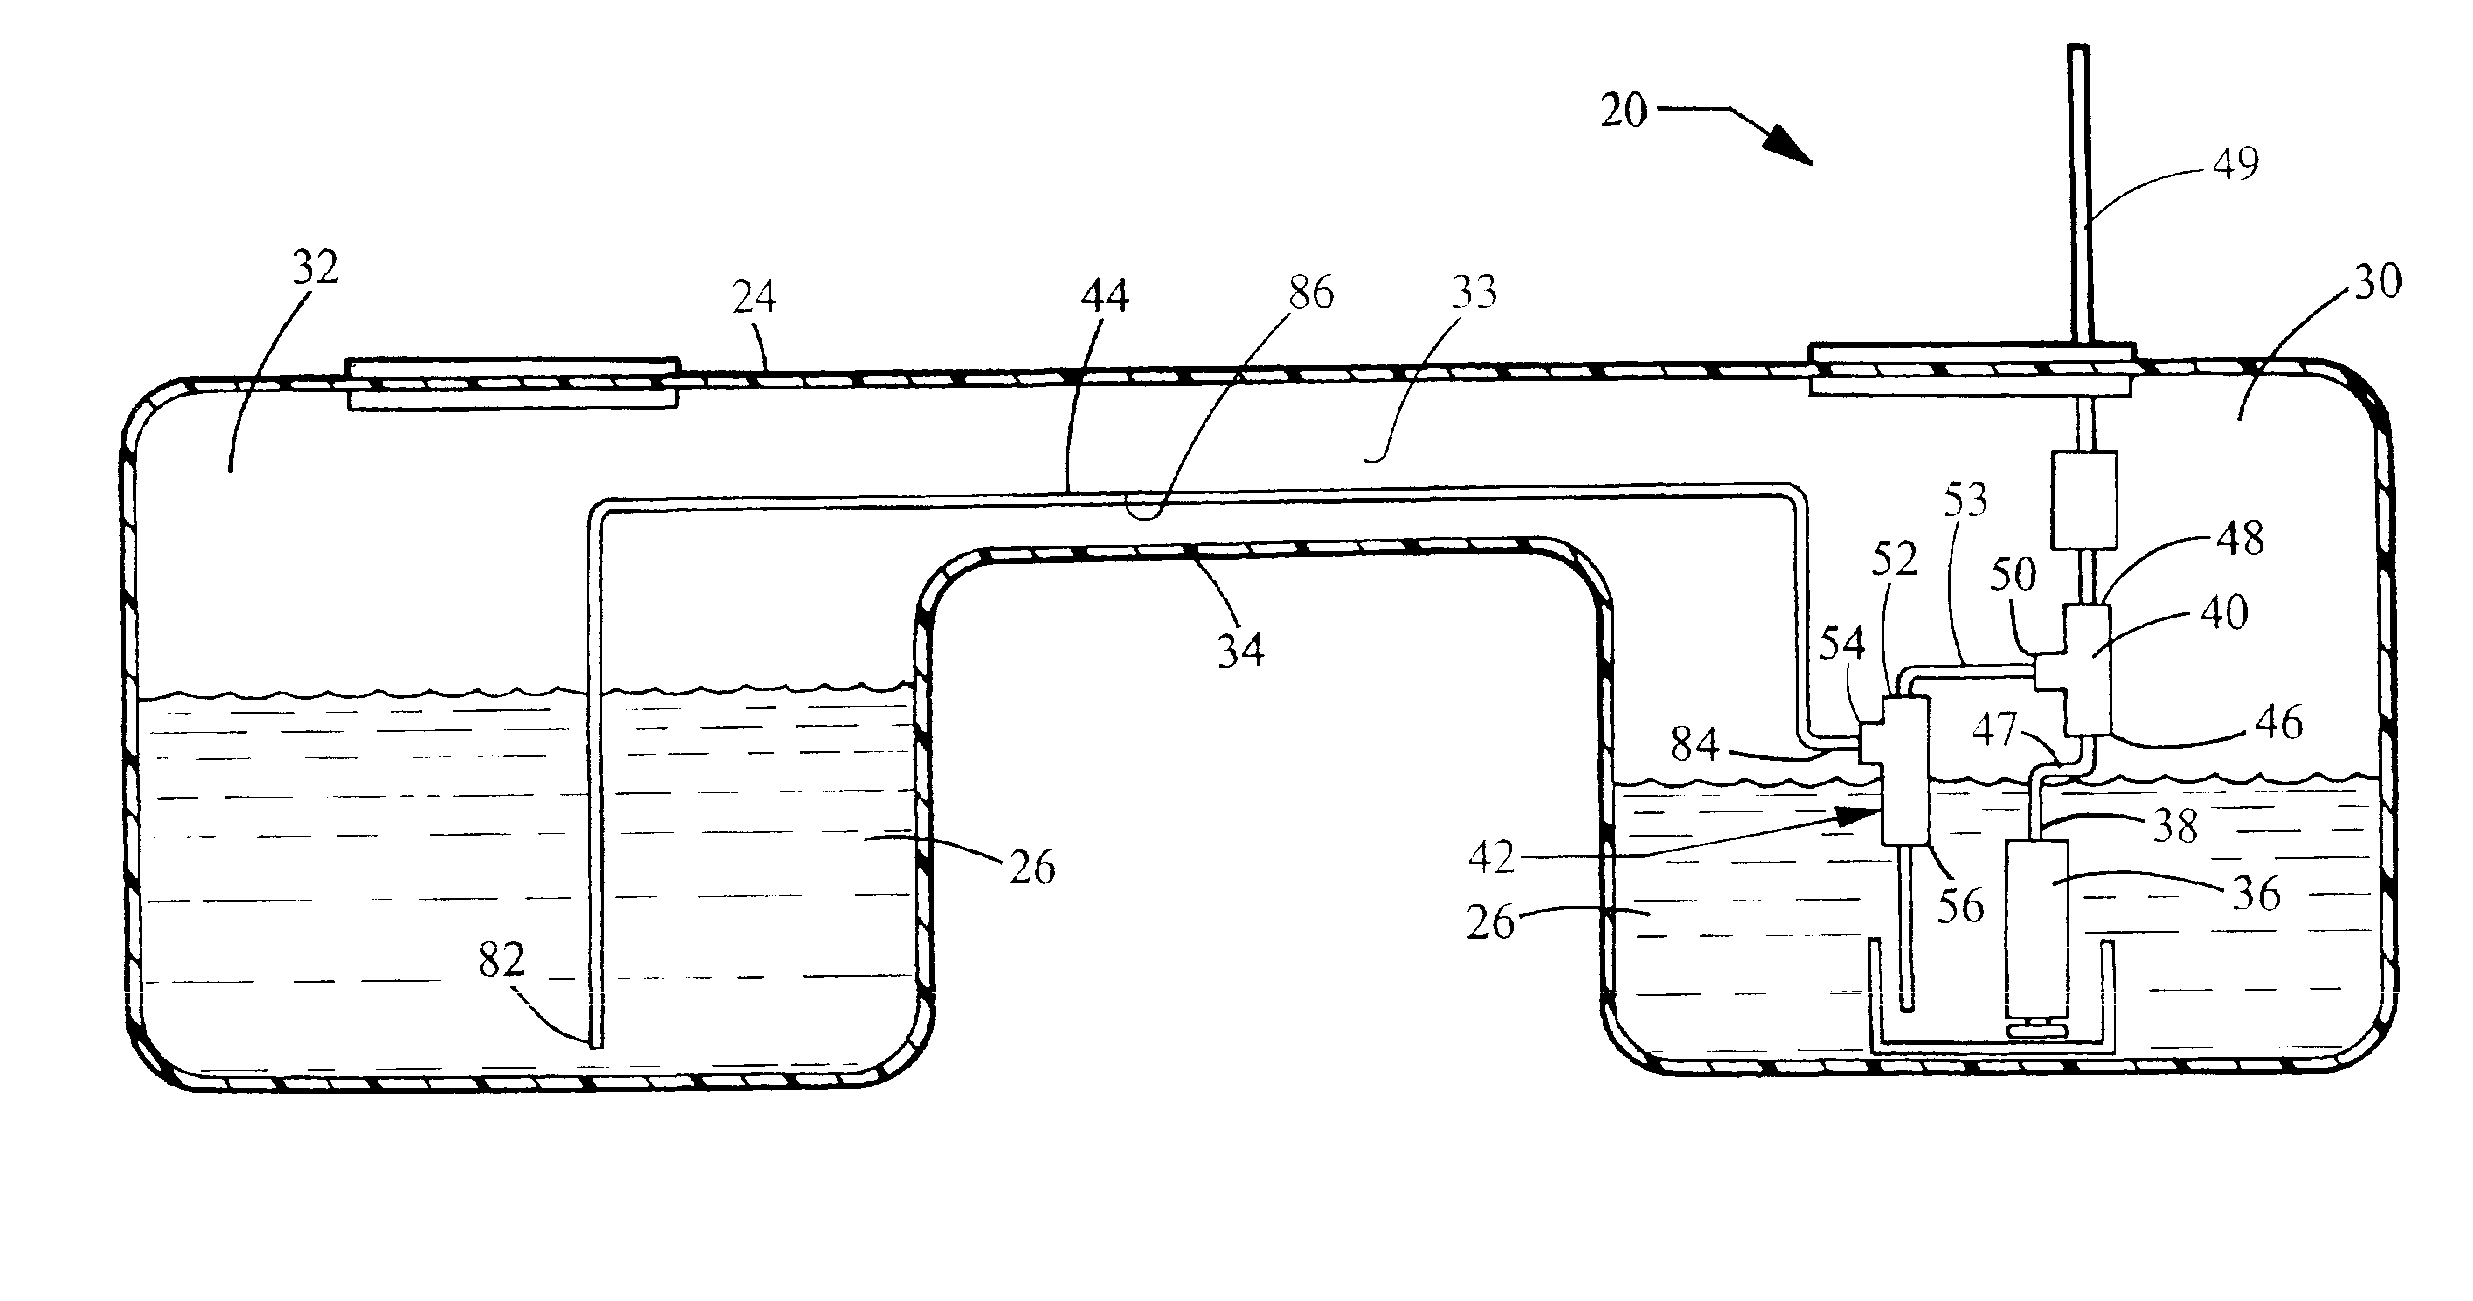 Saddle tank fuel delivery system